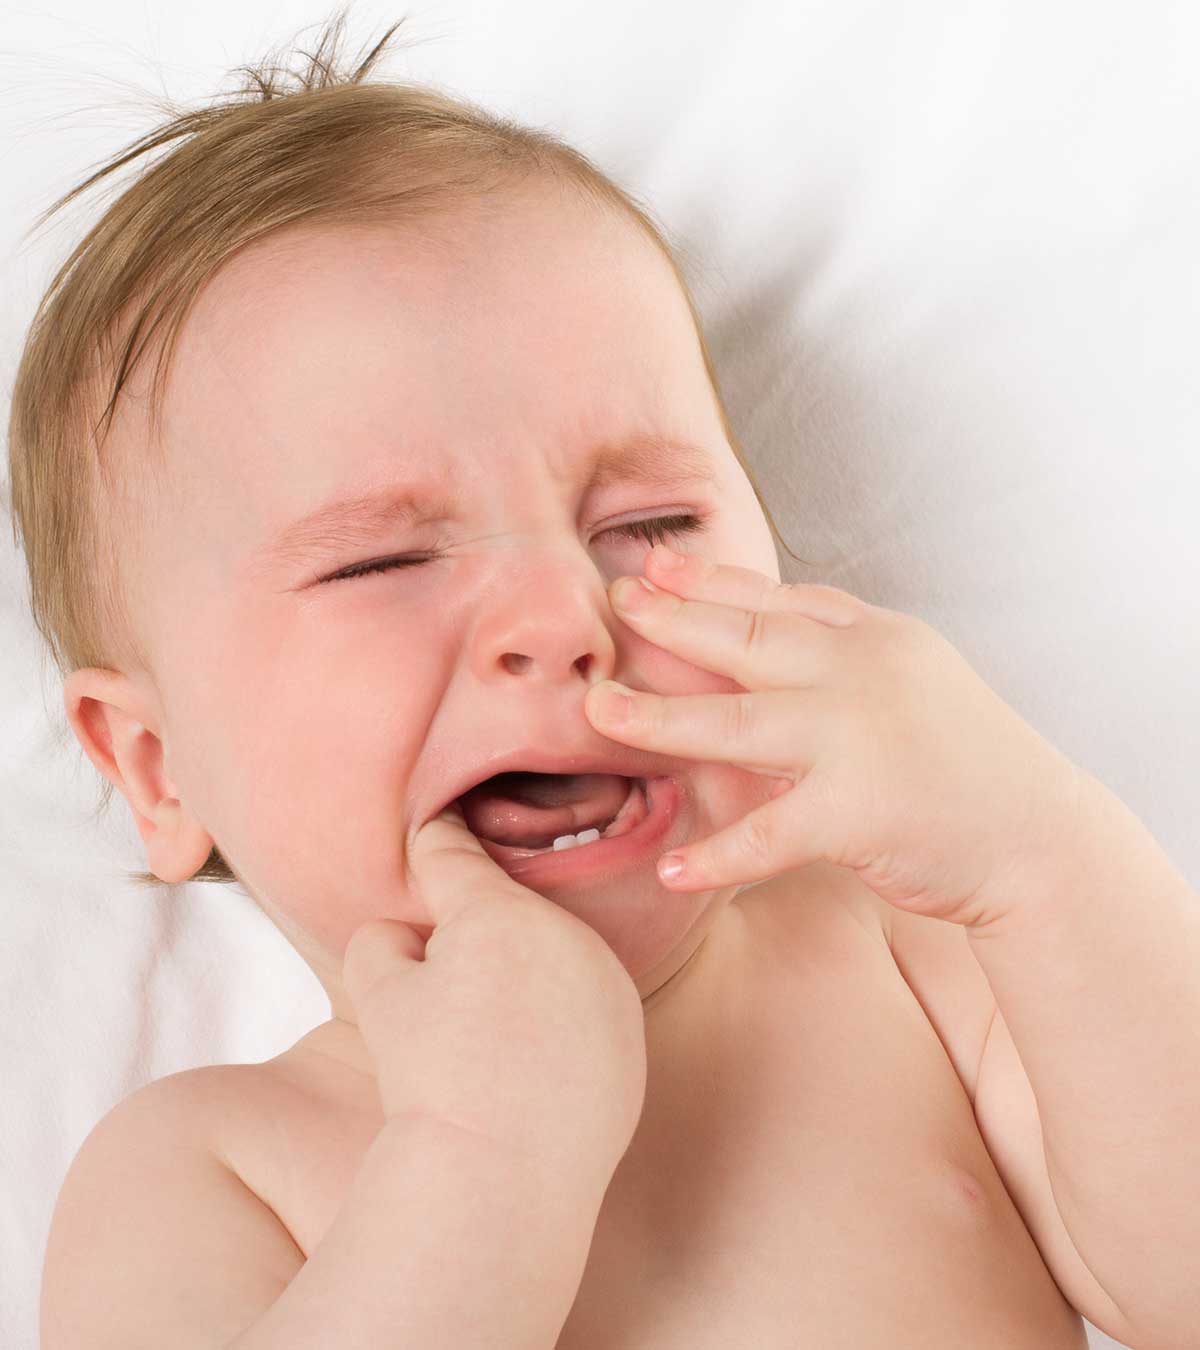 20 Baby Teething Myths And Facts Every Parent Should Know